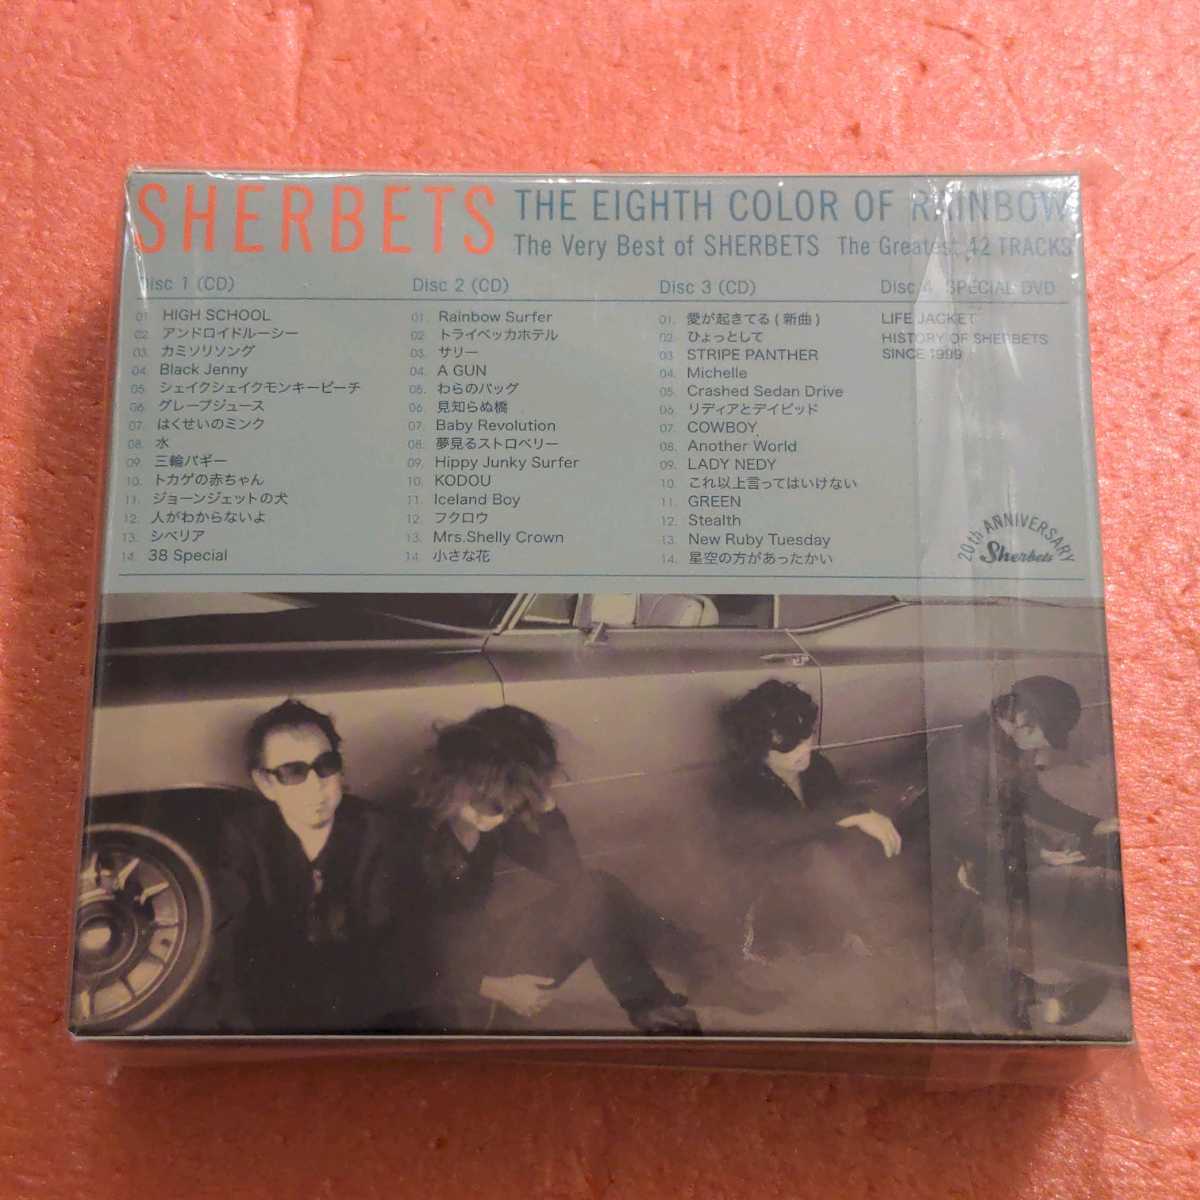 3CD+DVD 初回生産限定盤 THE VERY BEST OF Sherbets 8色目の虹 The Eighth Color Of Rainbow 浅井健一 シャーベッツ 4枚組_画像3